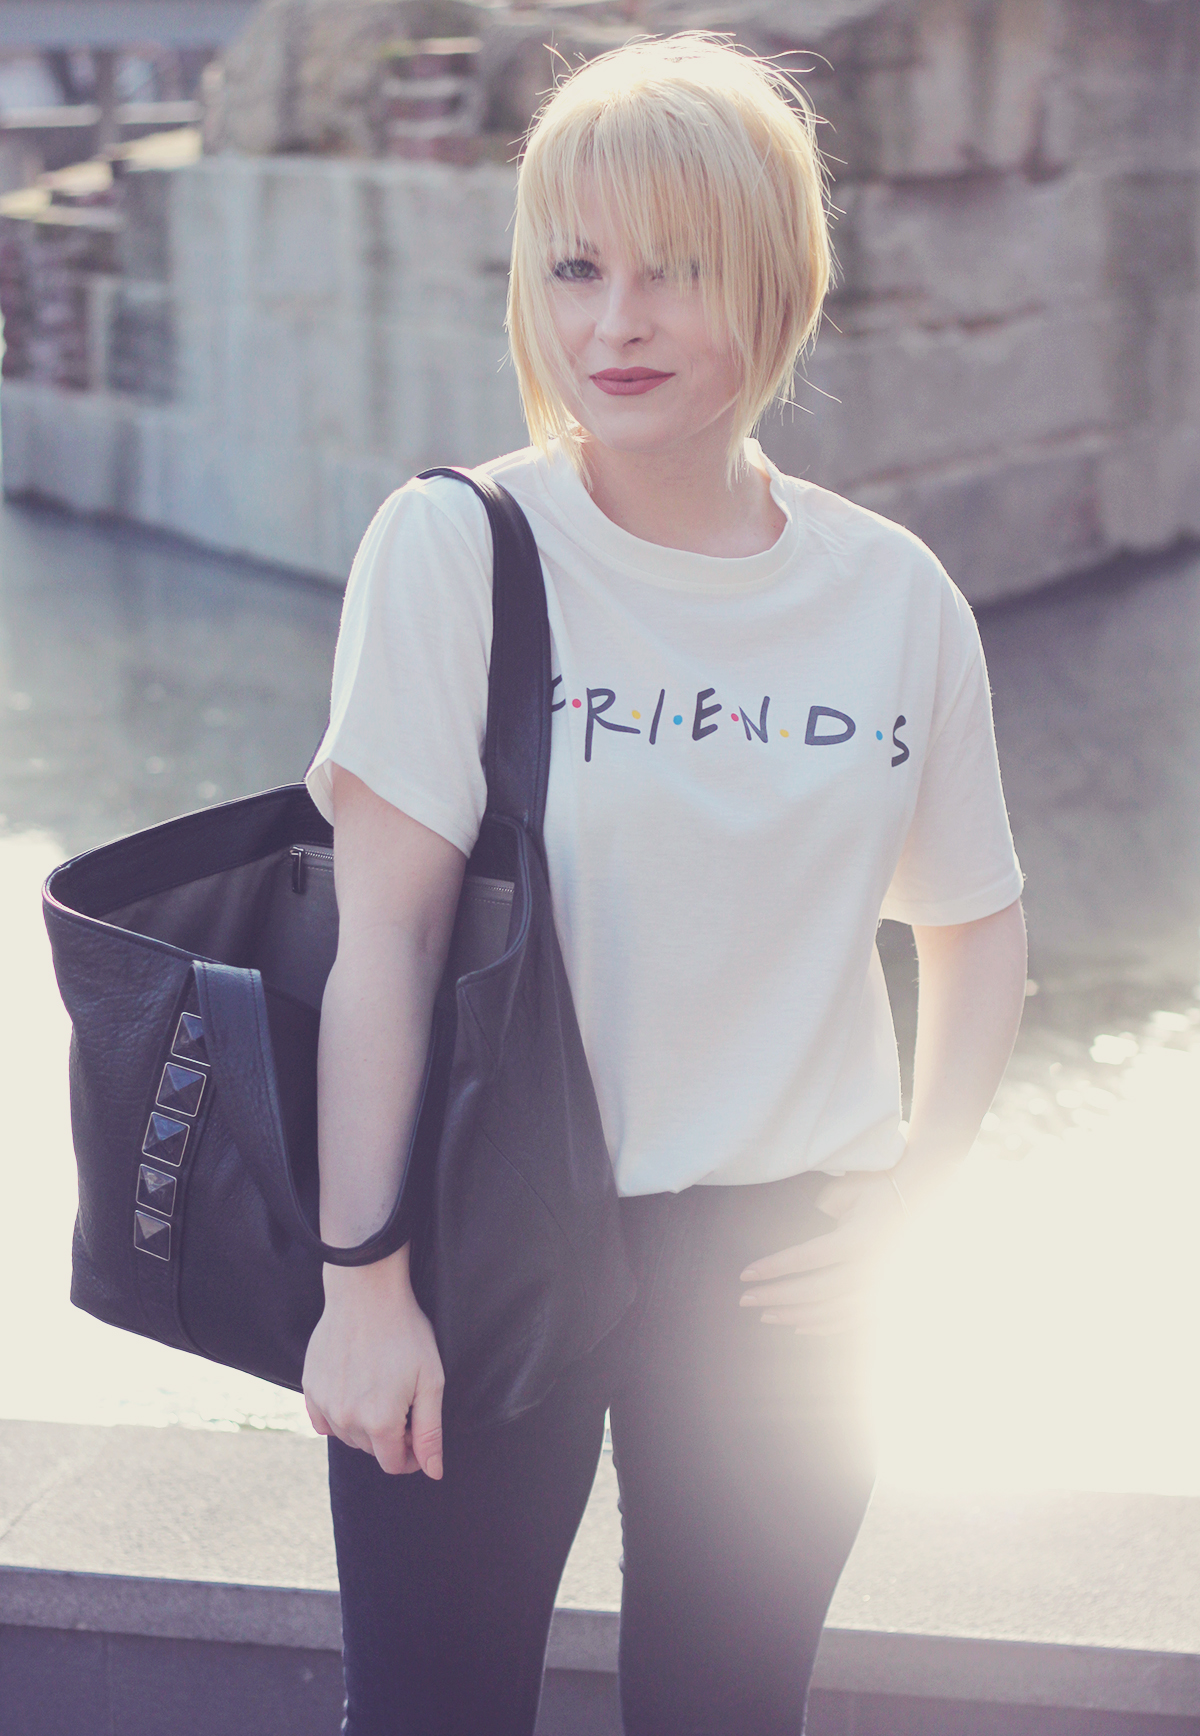 Friends t-shirt, Marc Jacobs tote bag, jeans, short blonde bob, spring, spring fashion, street style, casual